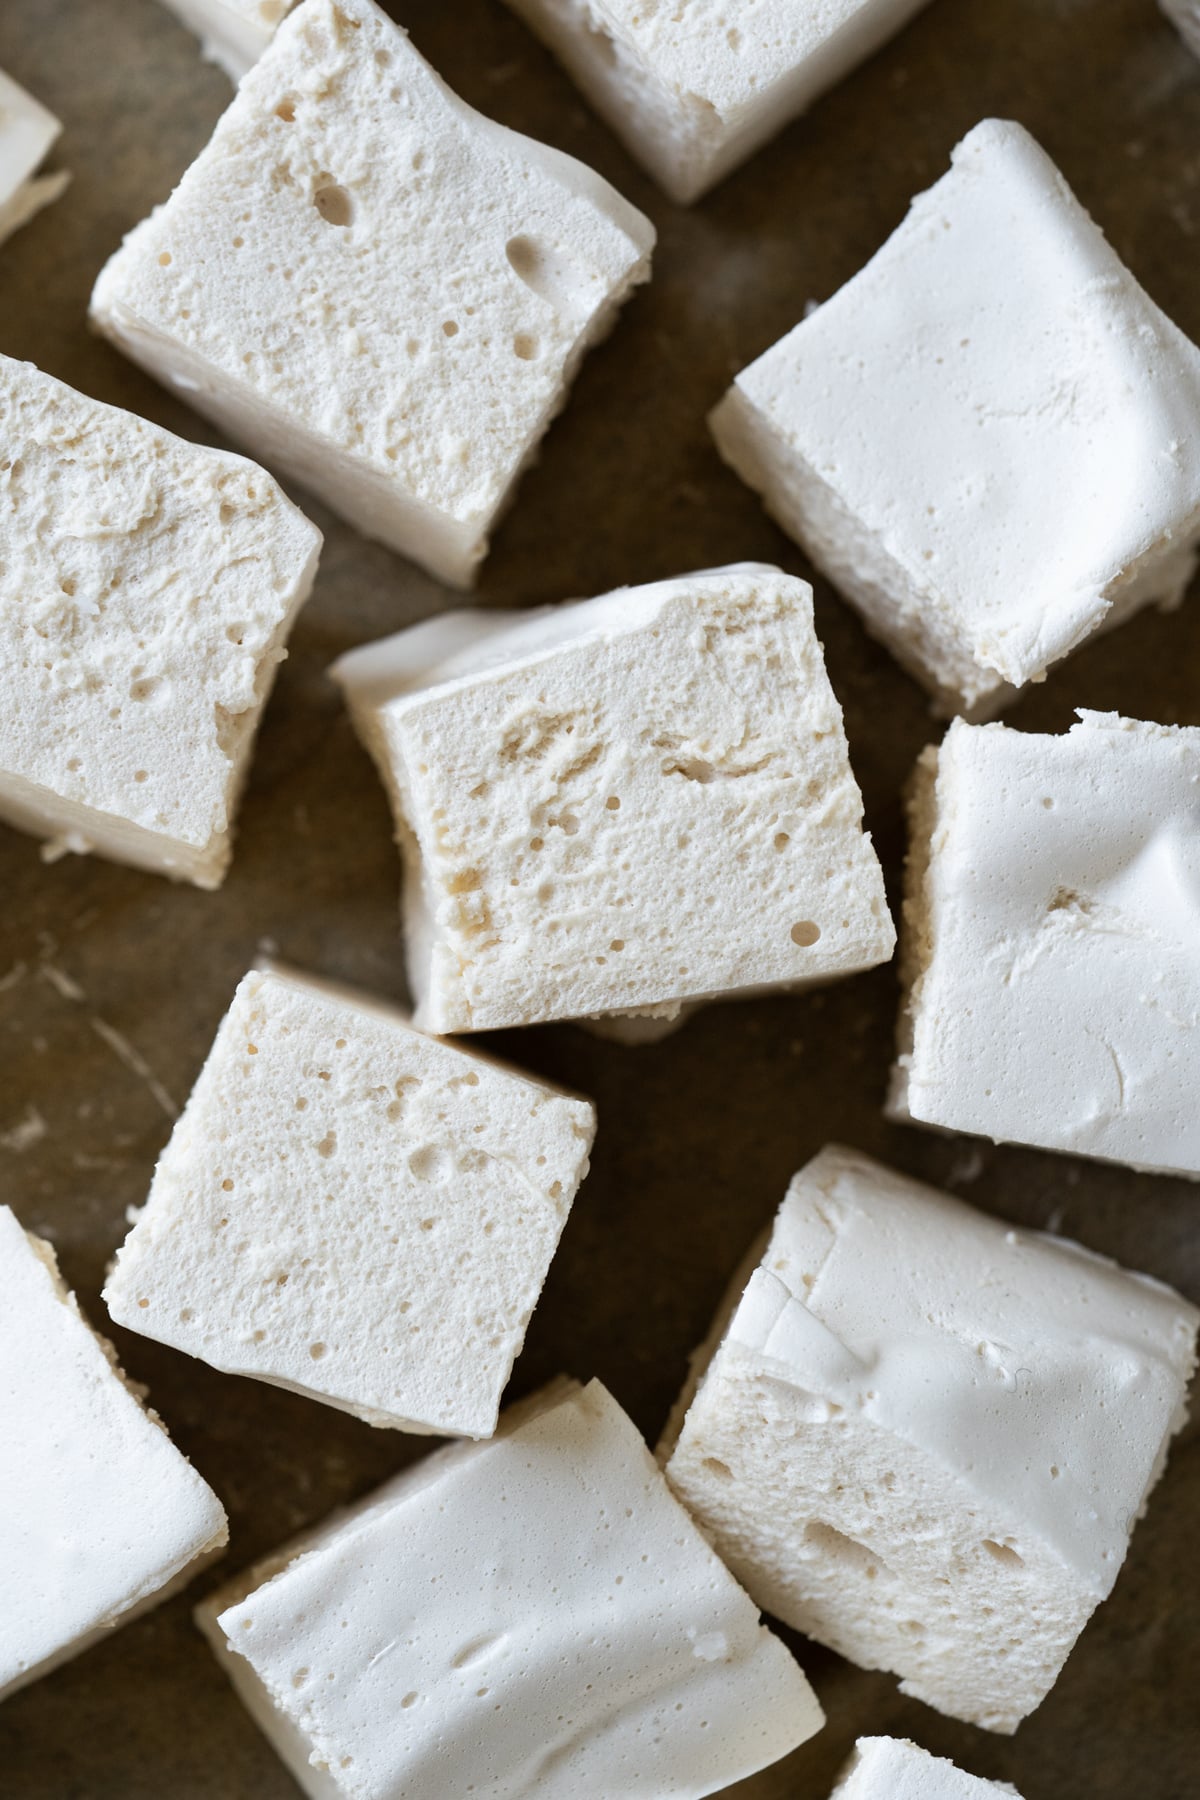 Closeup maple marshmallows showing their fluffy and airy texture